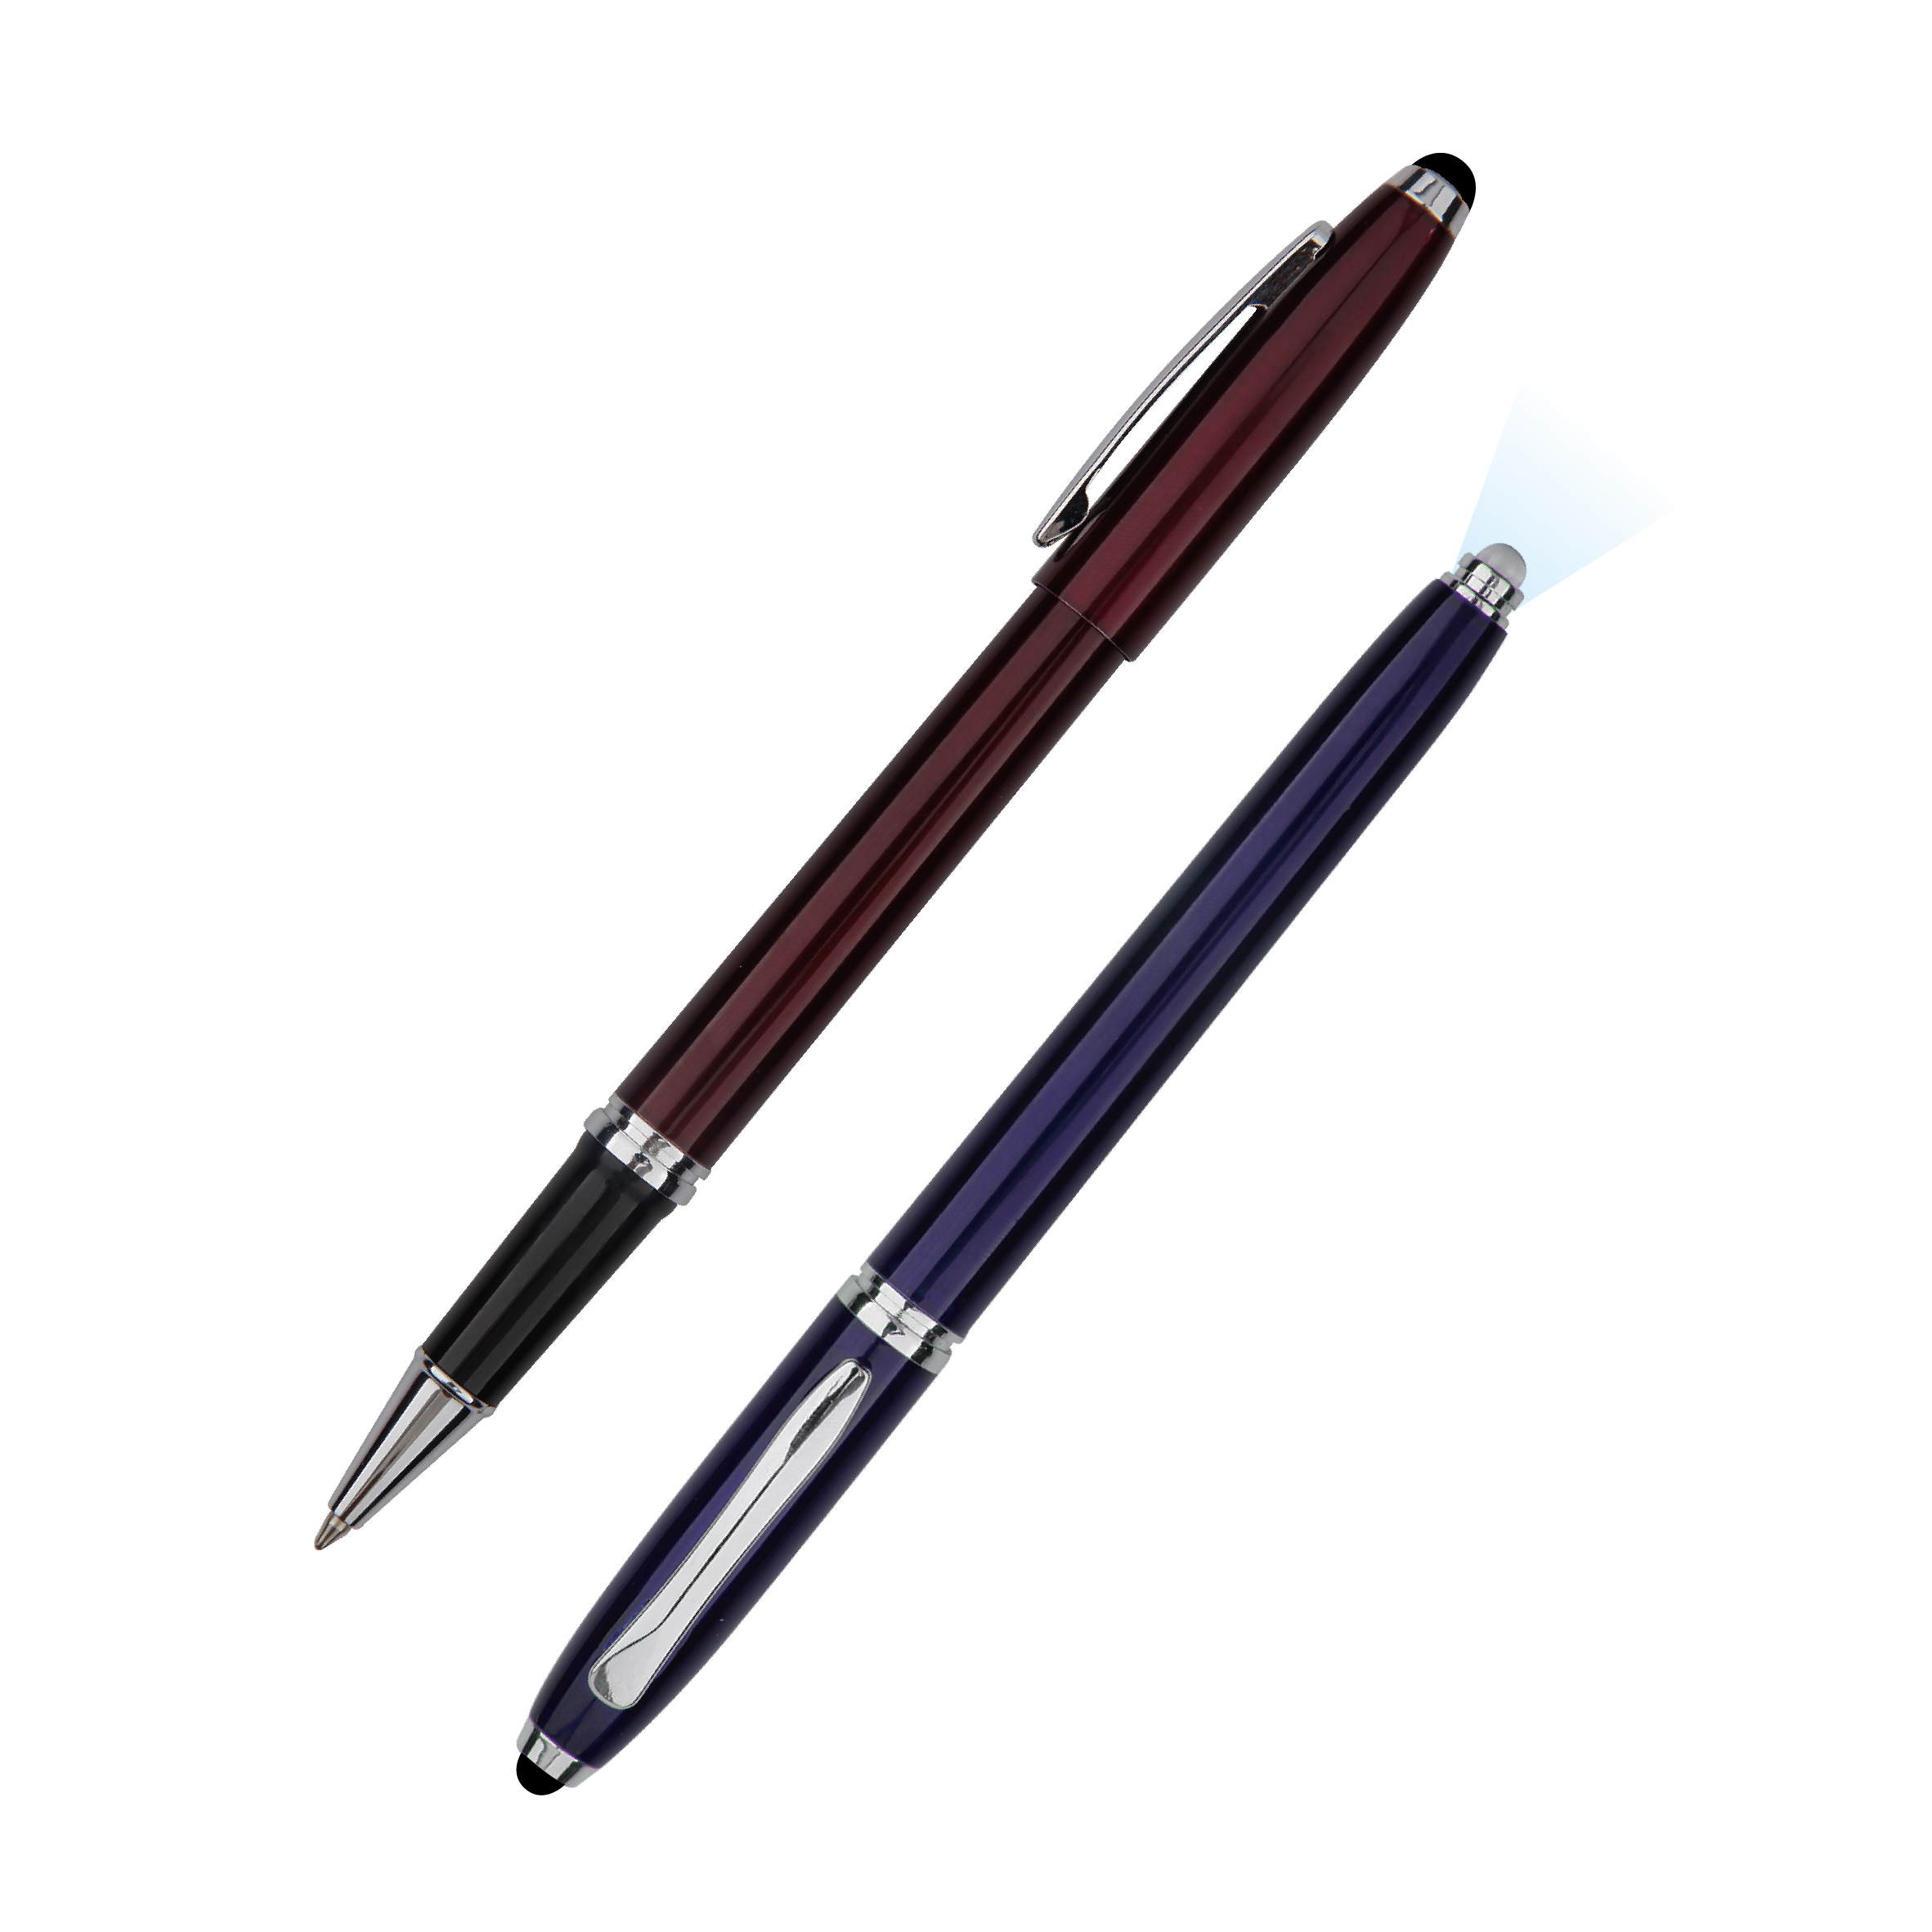 0.7&1.0mm Cap Off Metal Pen Stylus on End with Black&Blue&Red Ink